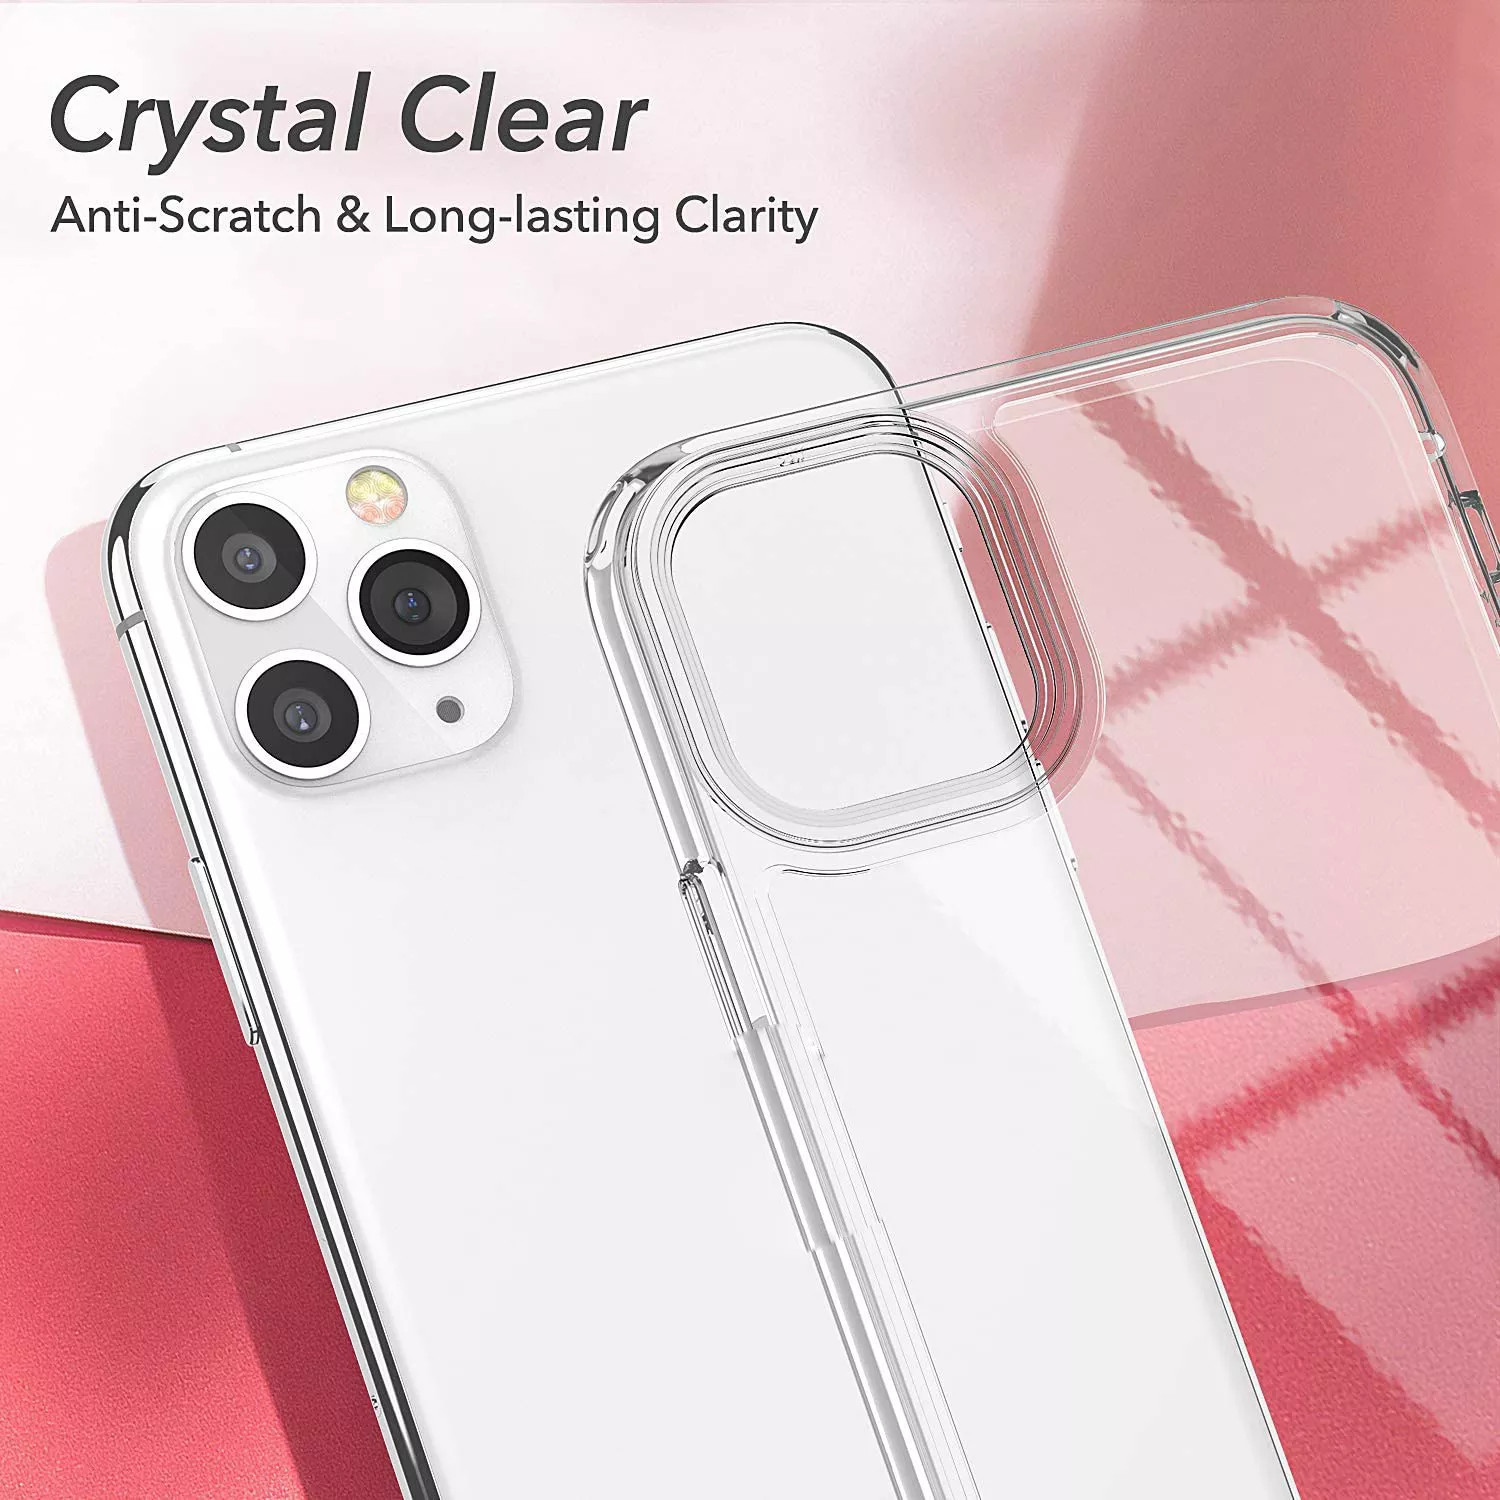 Ốp lưng chống sốc trong suốt cho iPhone 11 / 11 Pro / 11 Pro Max hiệu X-Level Sparkling Series